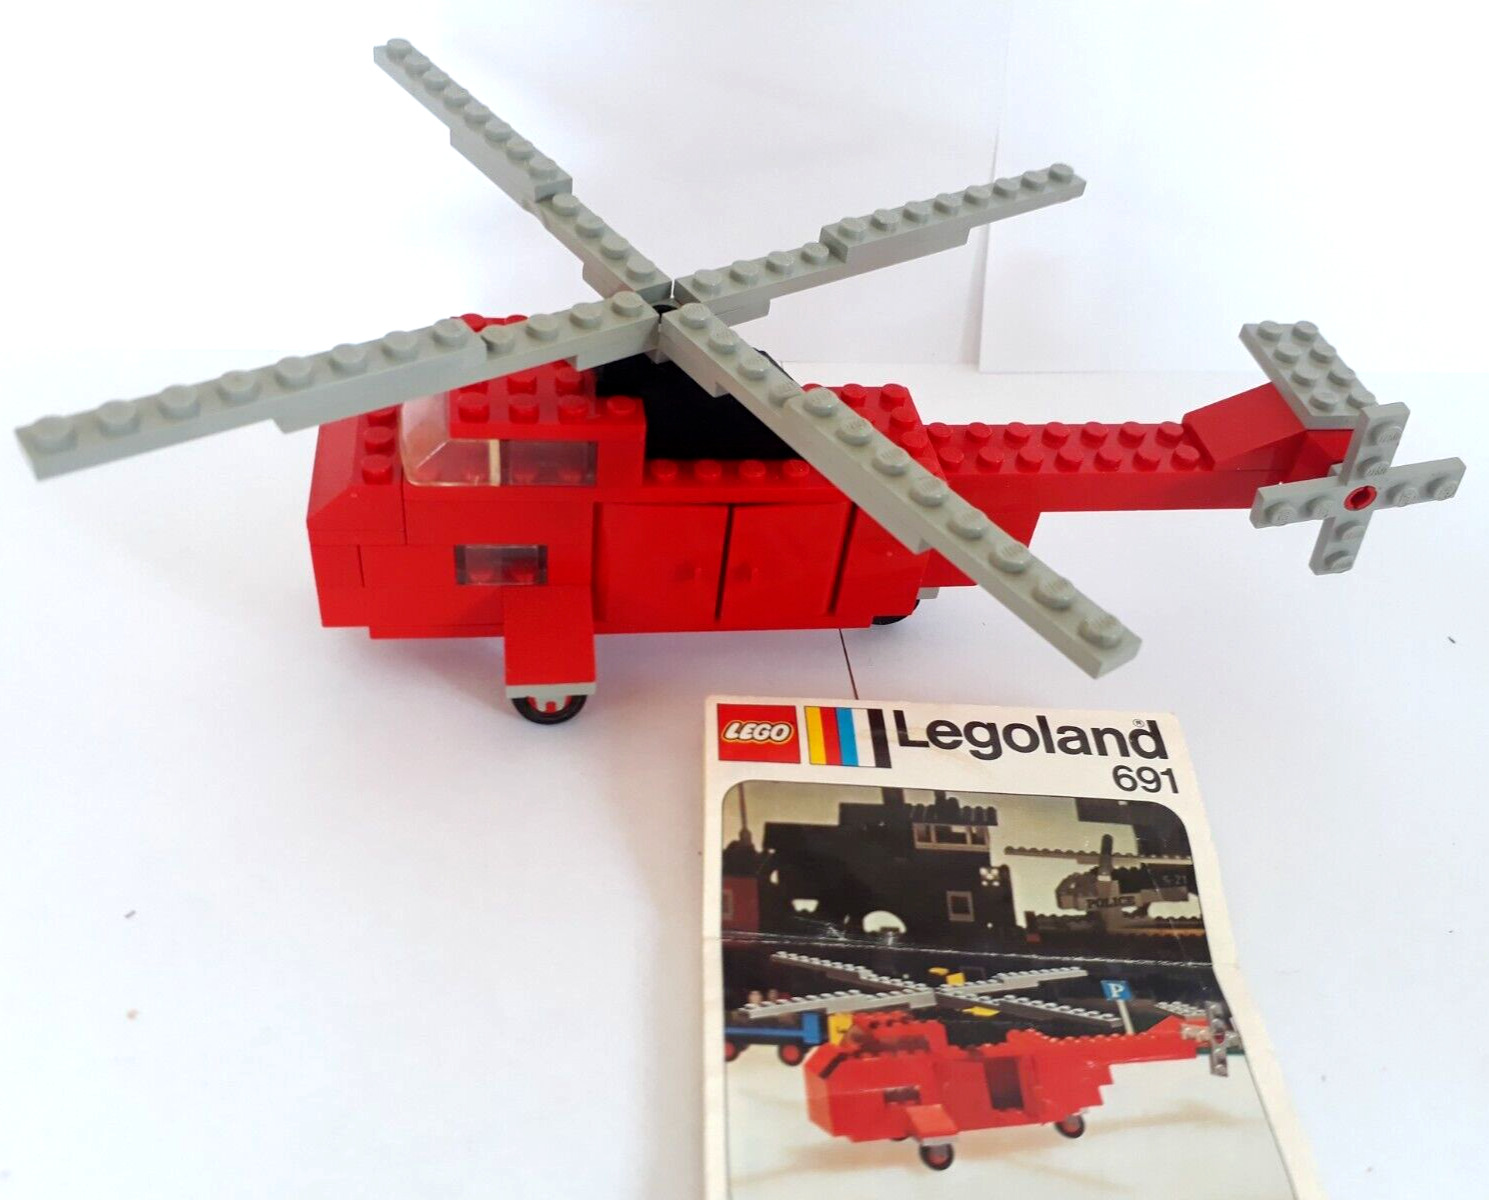 LEGO LEGOLAND CLASSIC SET 691  RESCUE HELICOPTER  WITH INSTRUCTIONS VINTAGE 1974